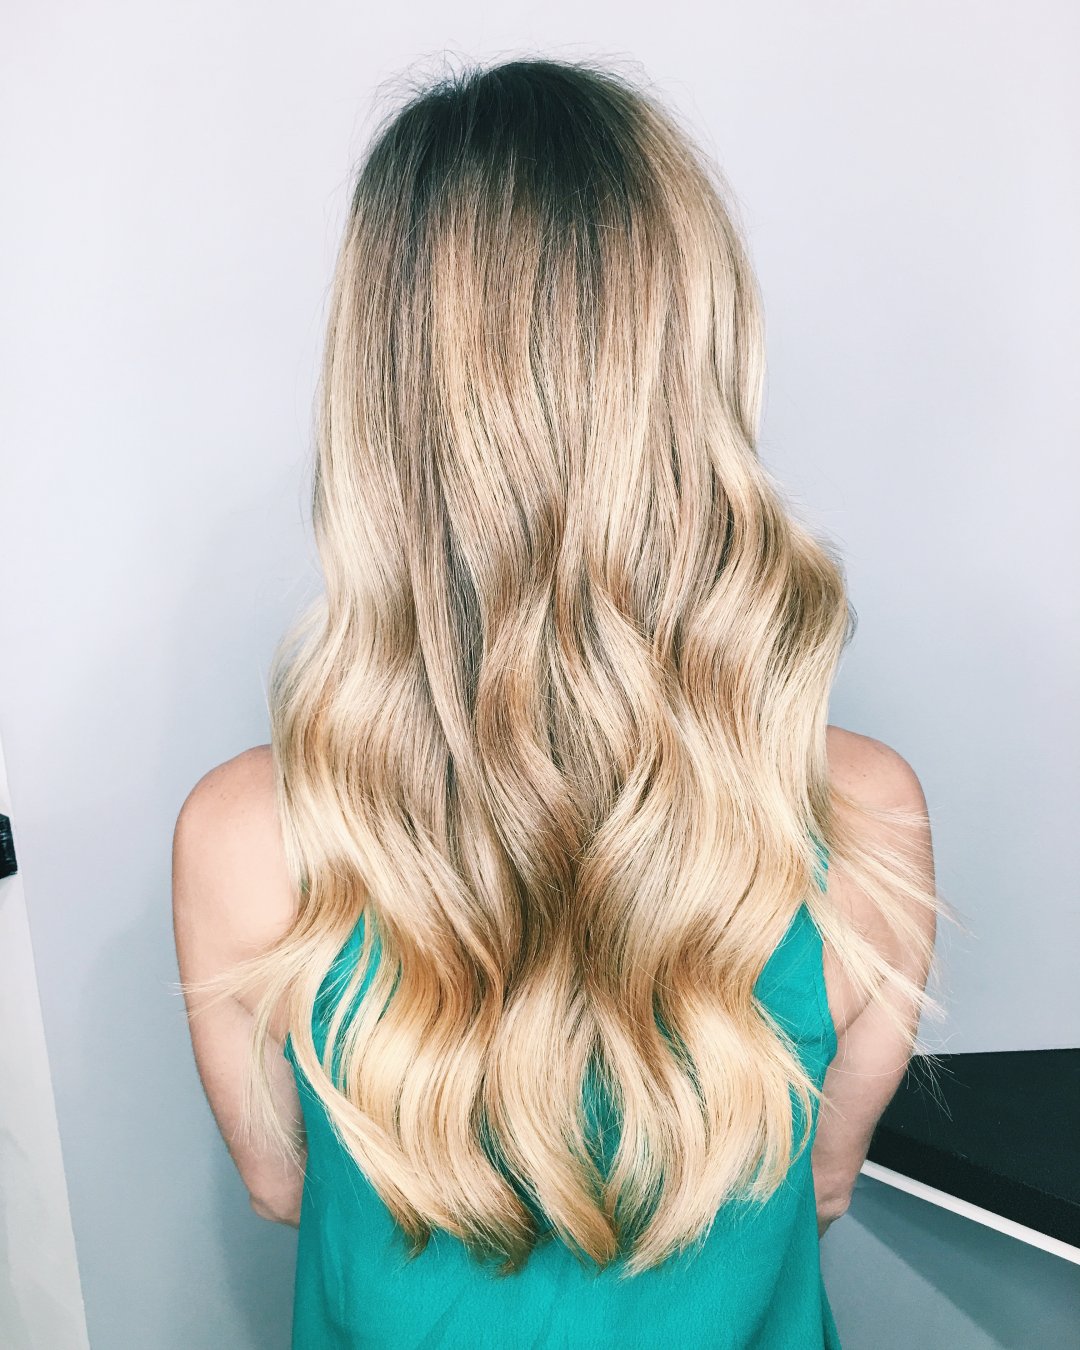 Everything you need to know about permanent hair extensions // my personal experience with getting microbead hair extensions // brighton keller hair extensions